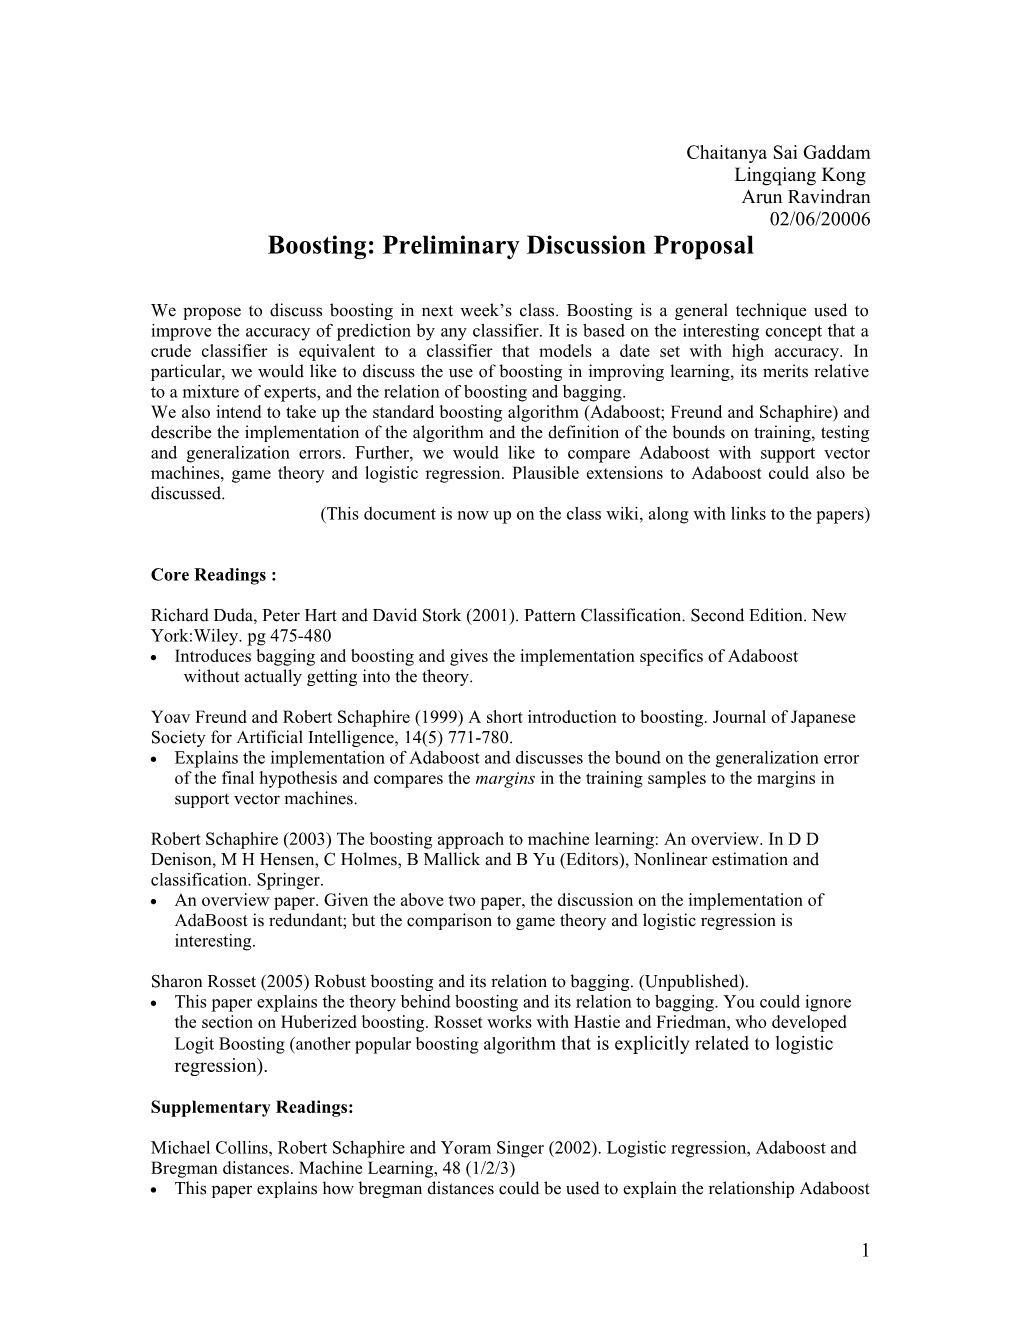 Boosting: Preliminary Discussion Proposal